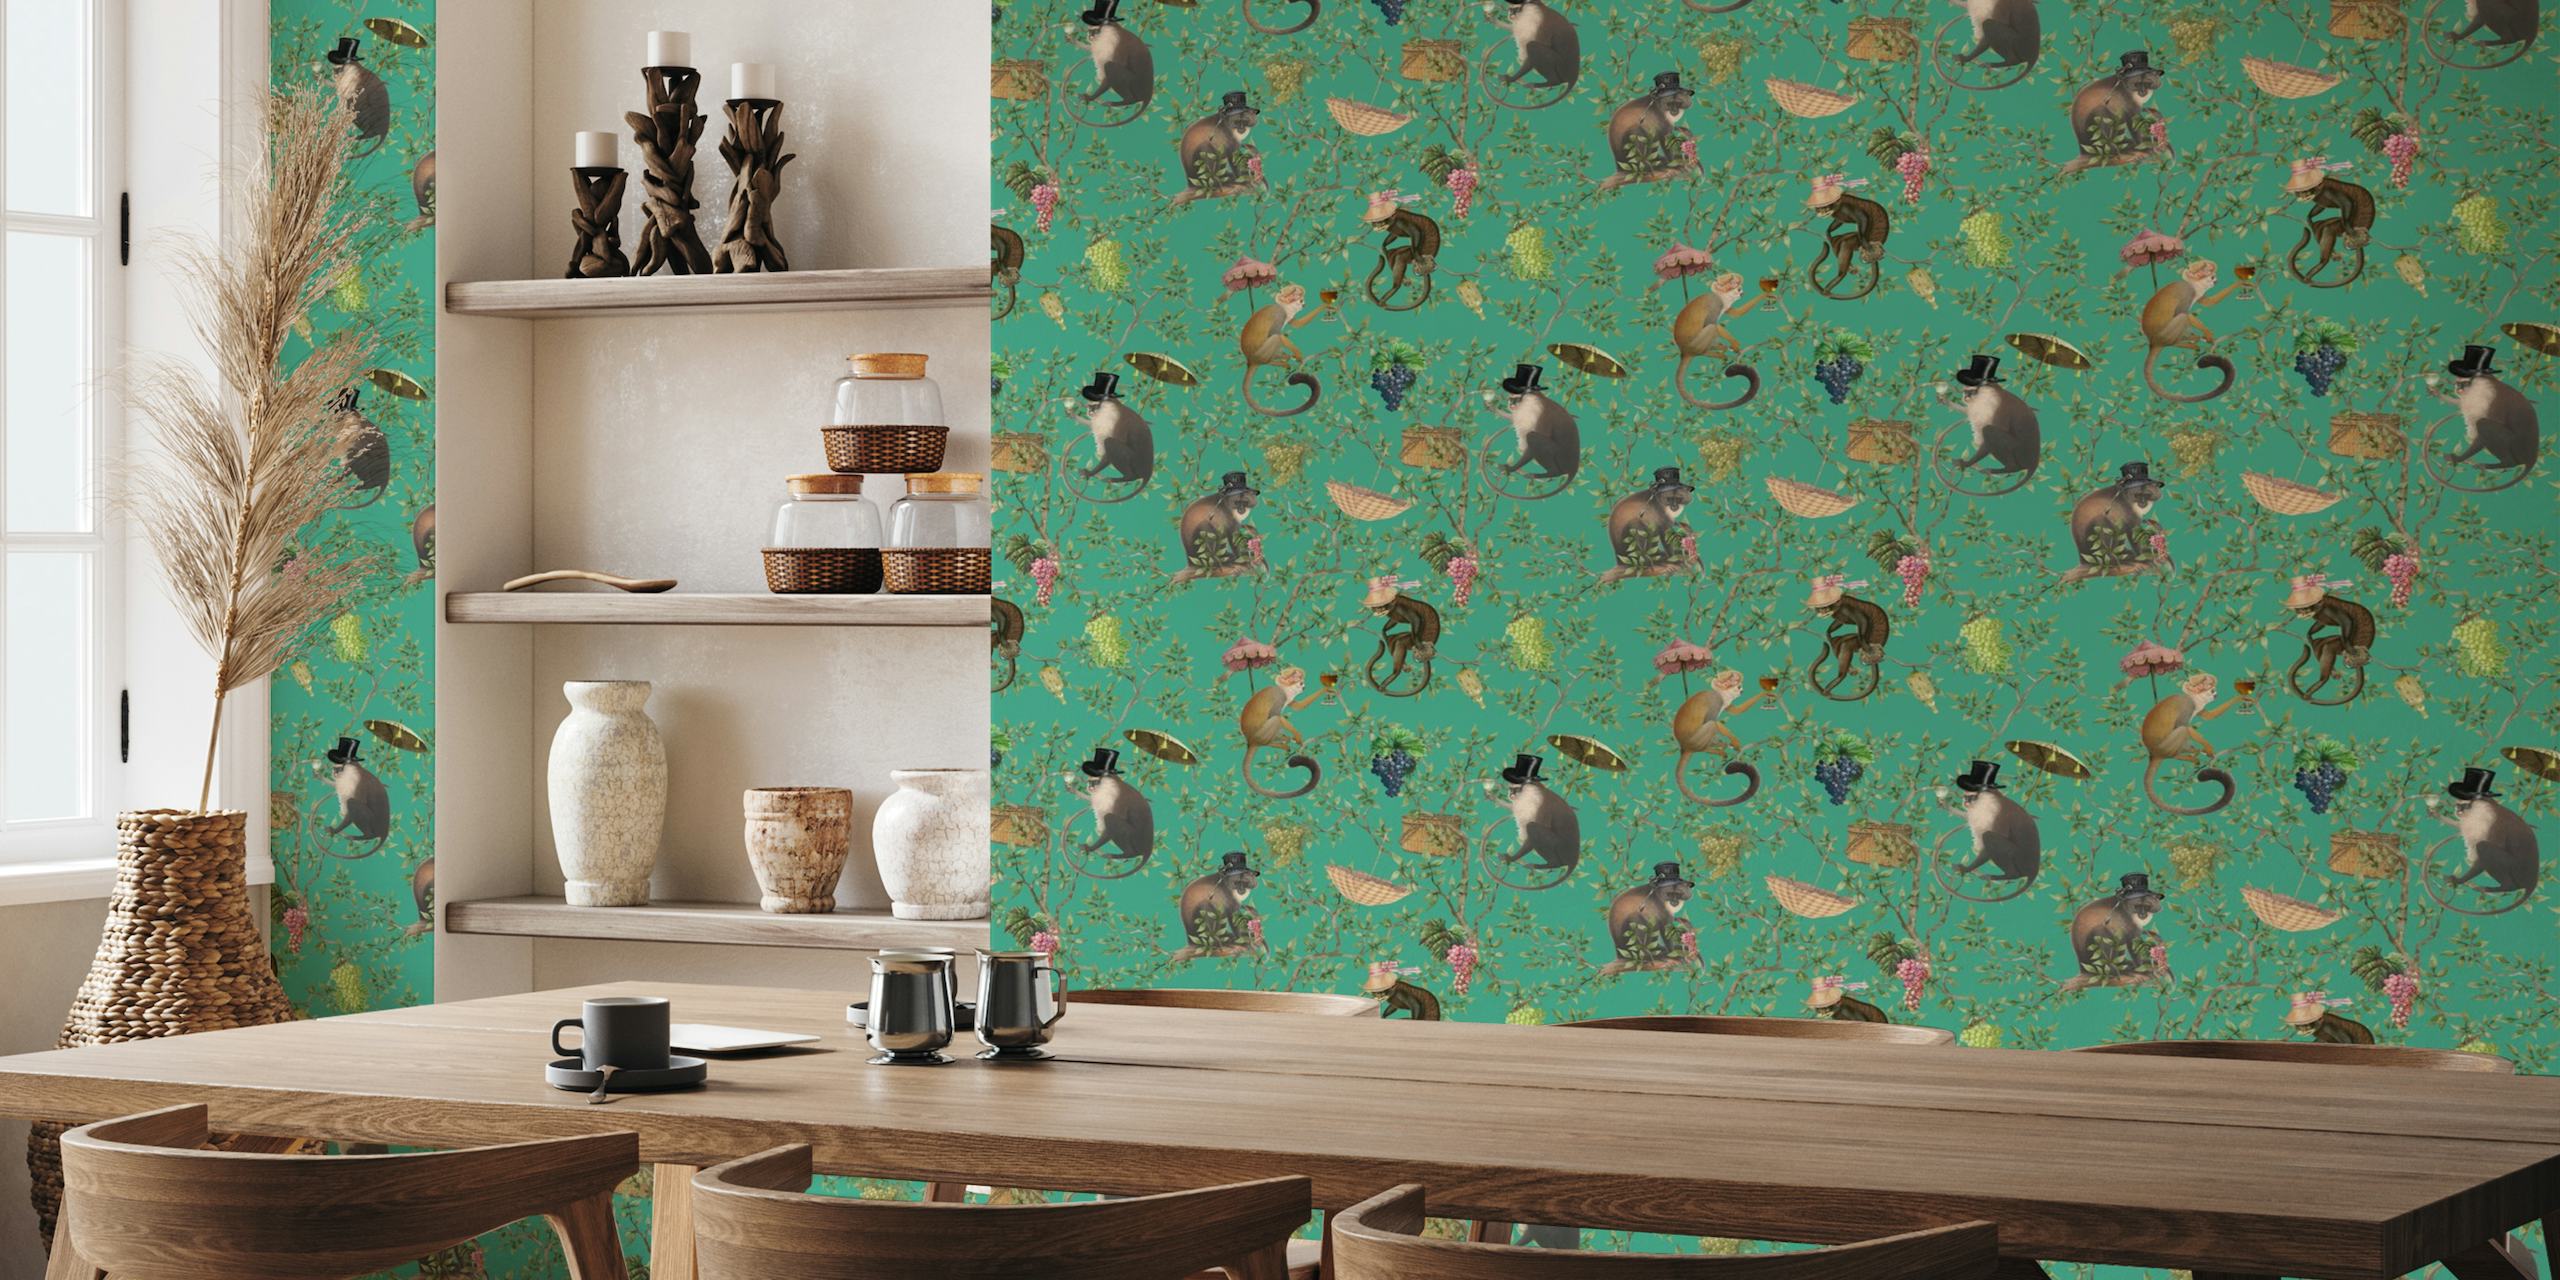 Monkeys in vintage clothing and accessories with tropical plants on teal background wall mural